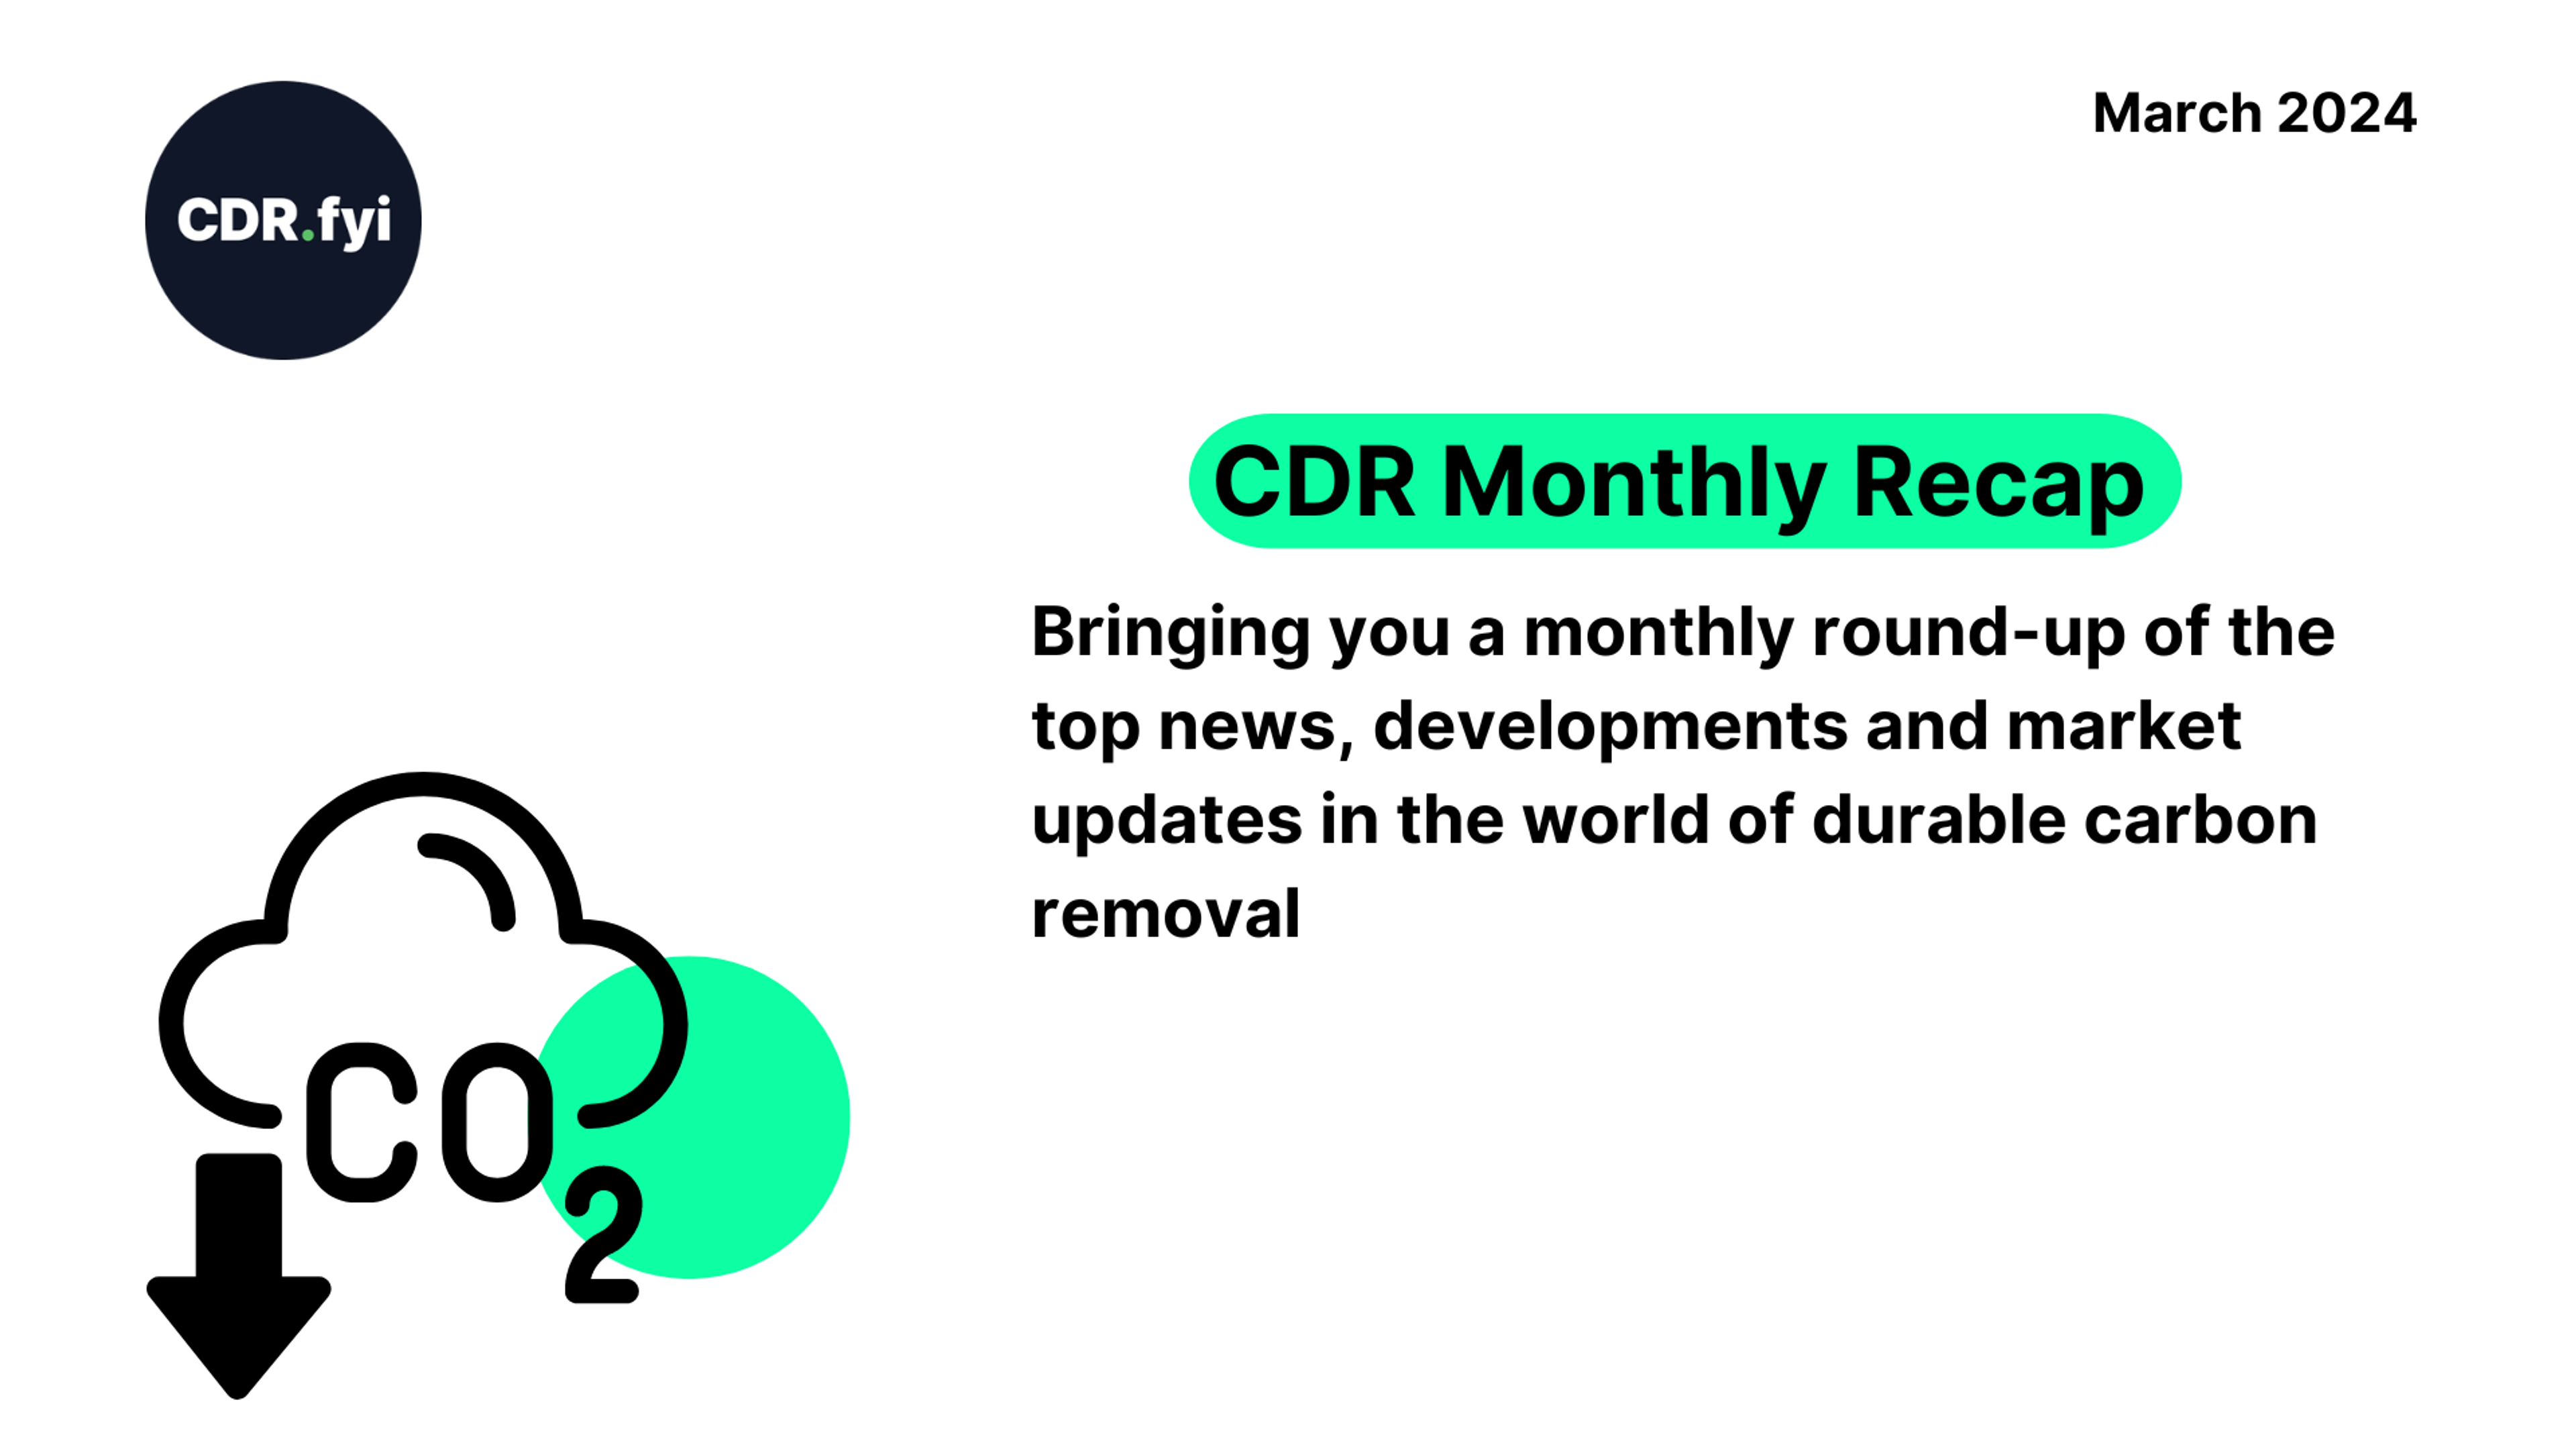 CDR Monthly Recap - March 2024 blog post image